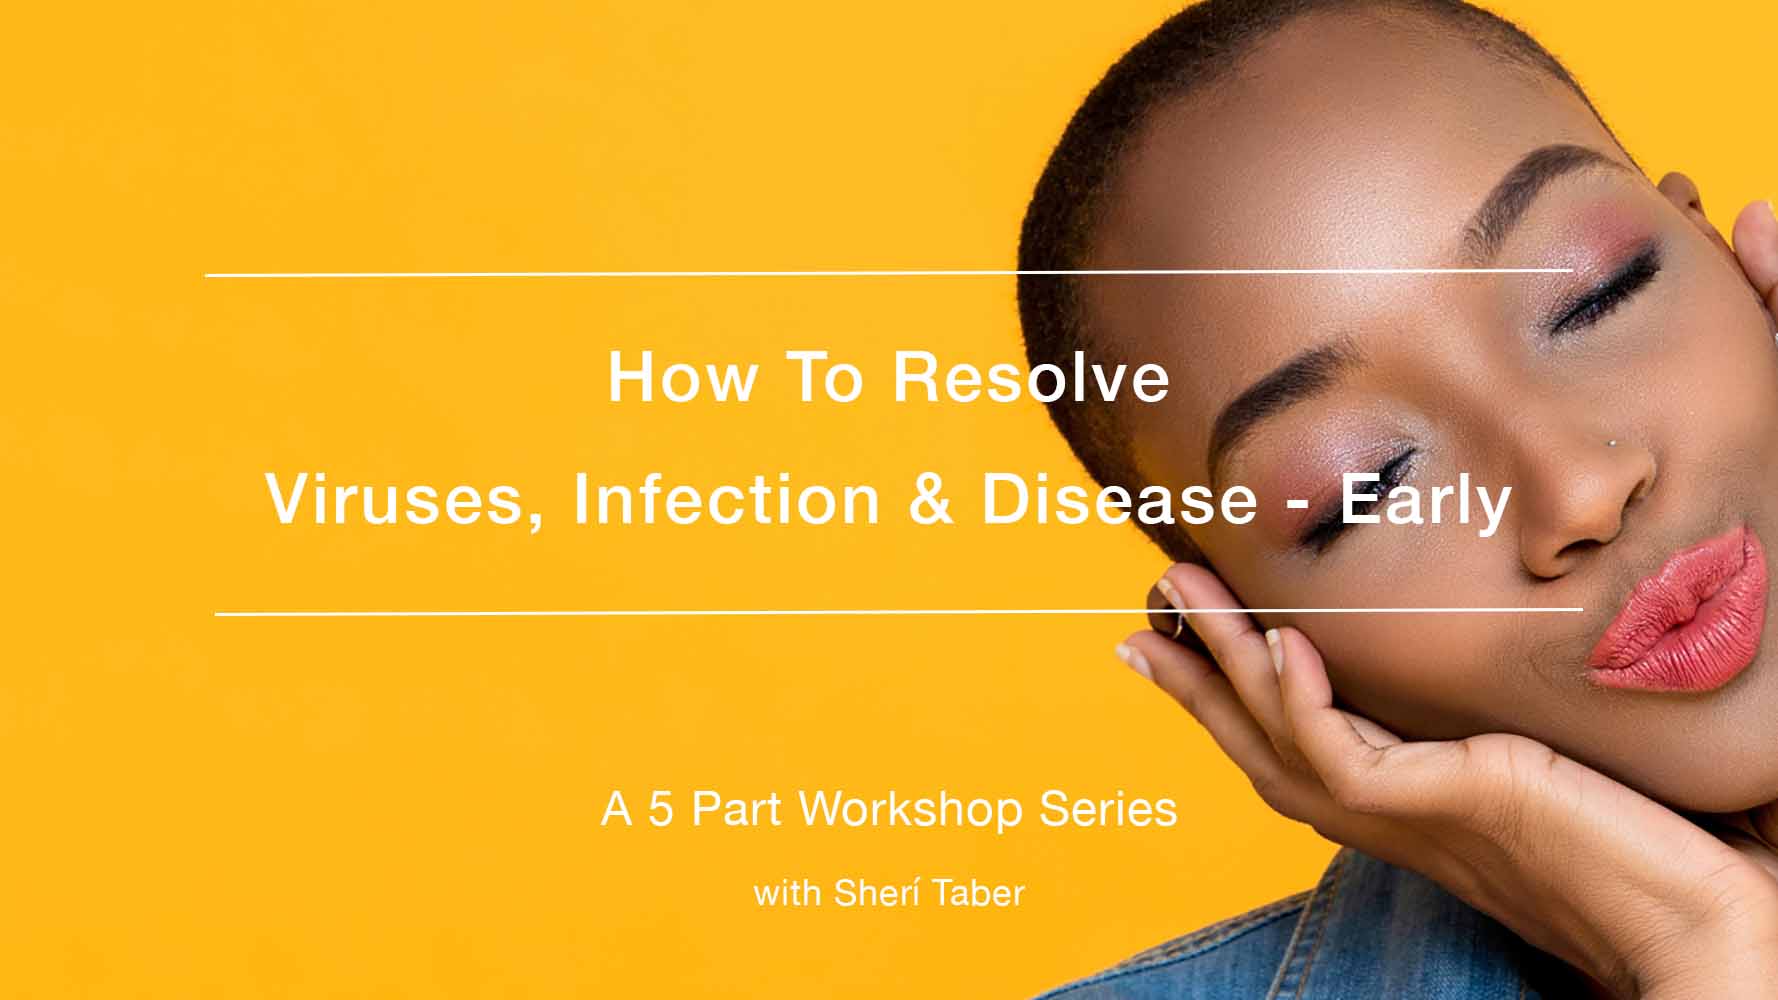 HOW-TO-RESOLVE-INFECTIONS-VIRUSES-DISEASE-EARLY